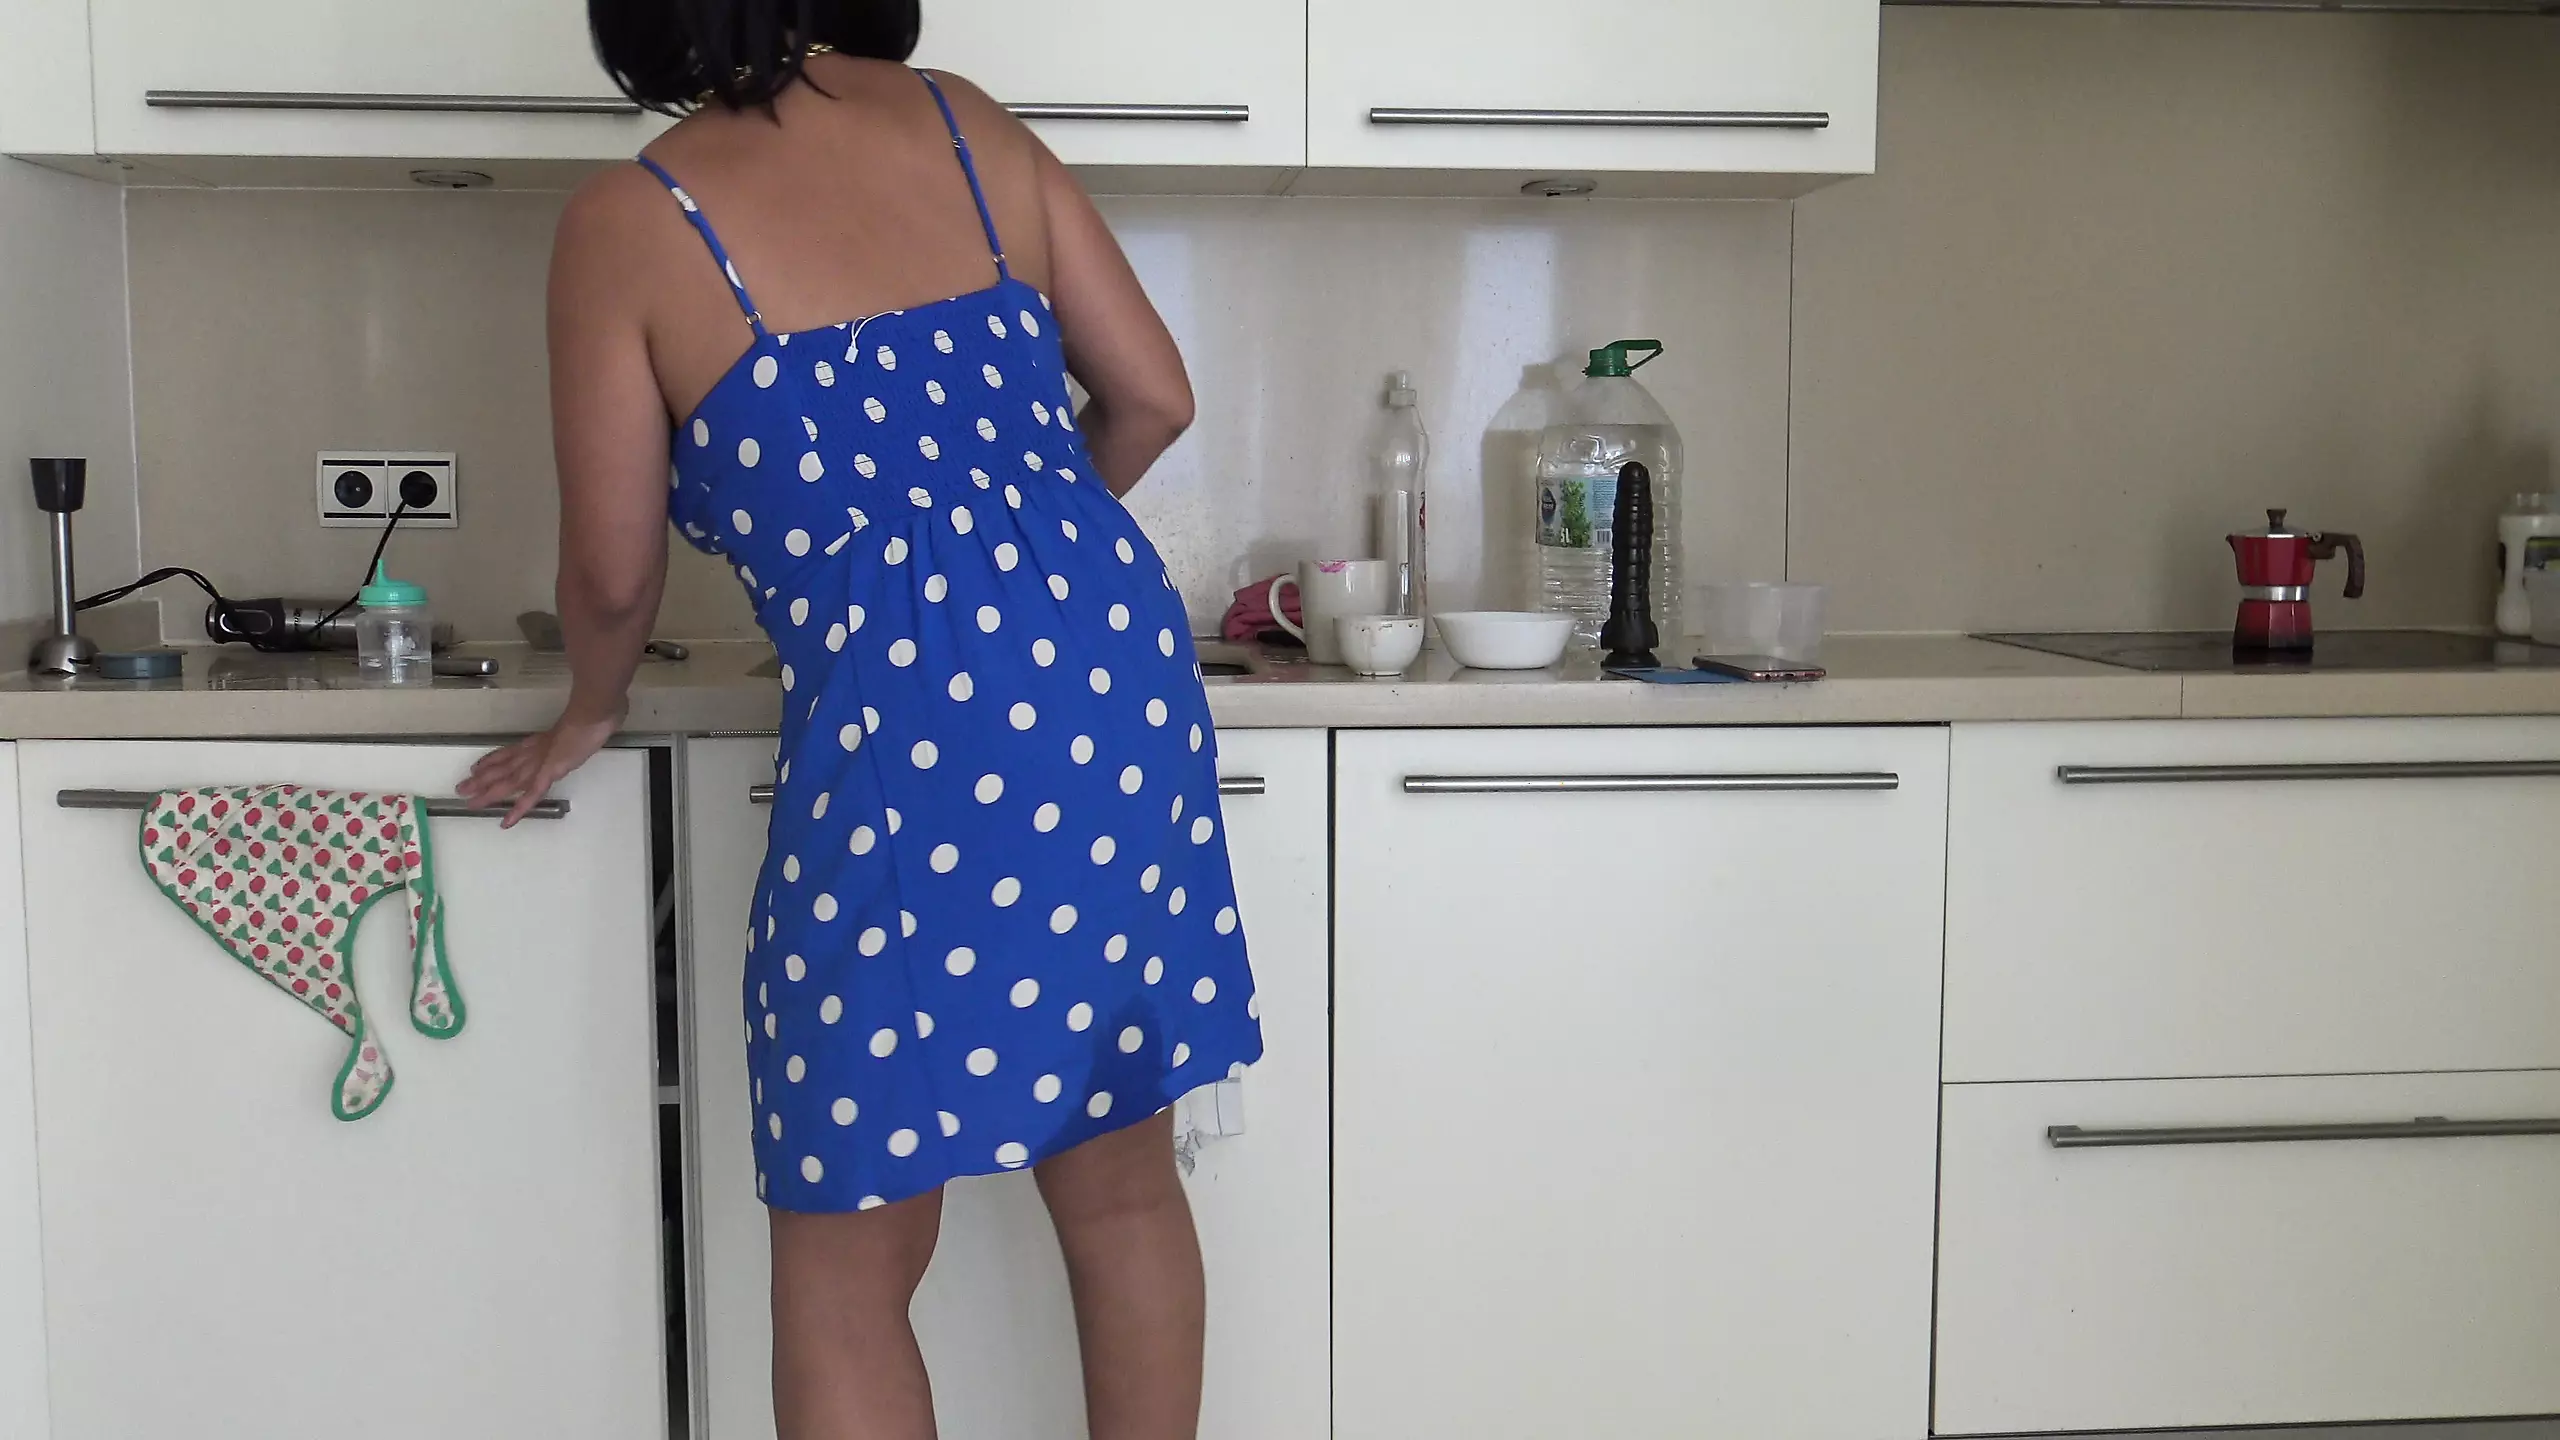 Busty French Cuckolding Wife Has Kitchen